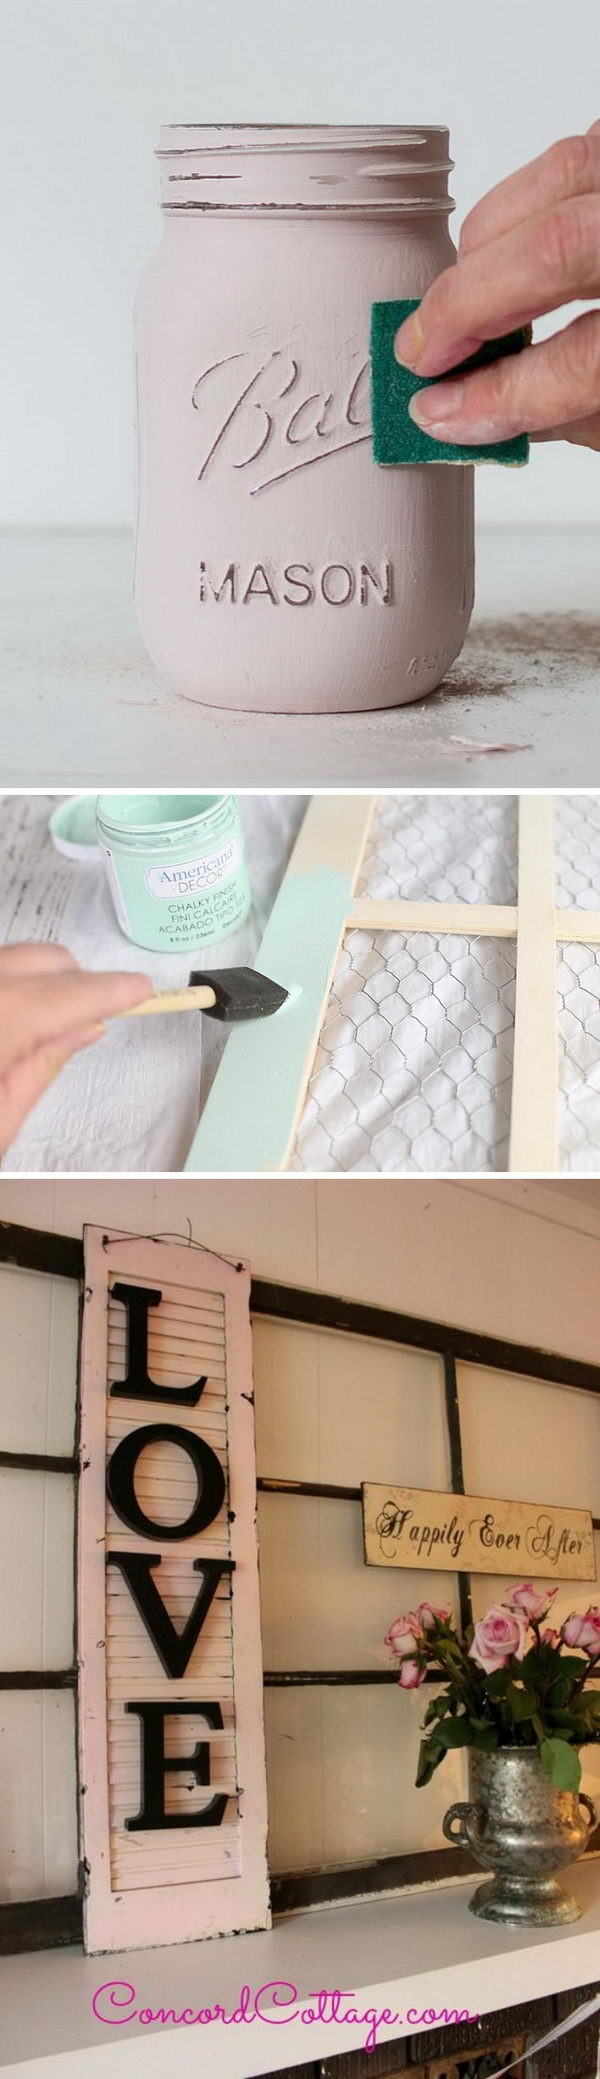 Awesome Shabby Chic Decor DIY Ideas & Projects 